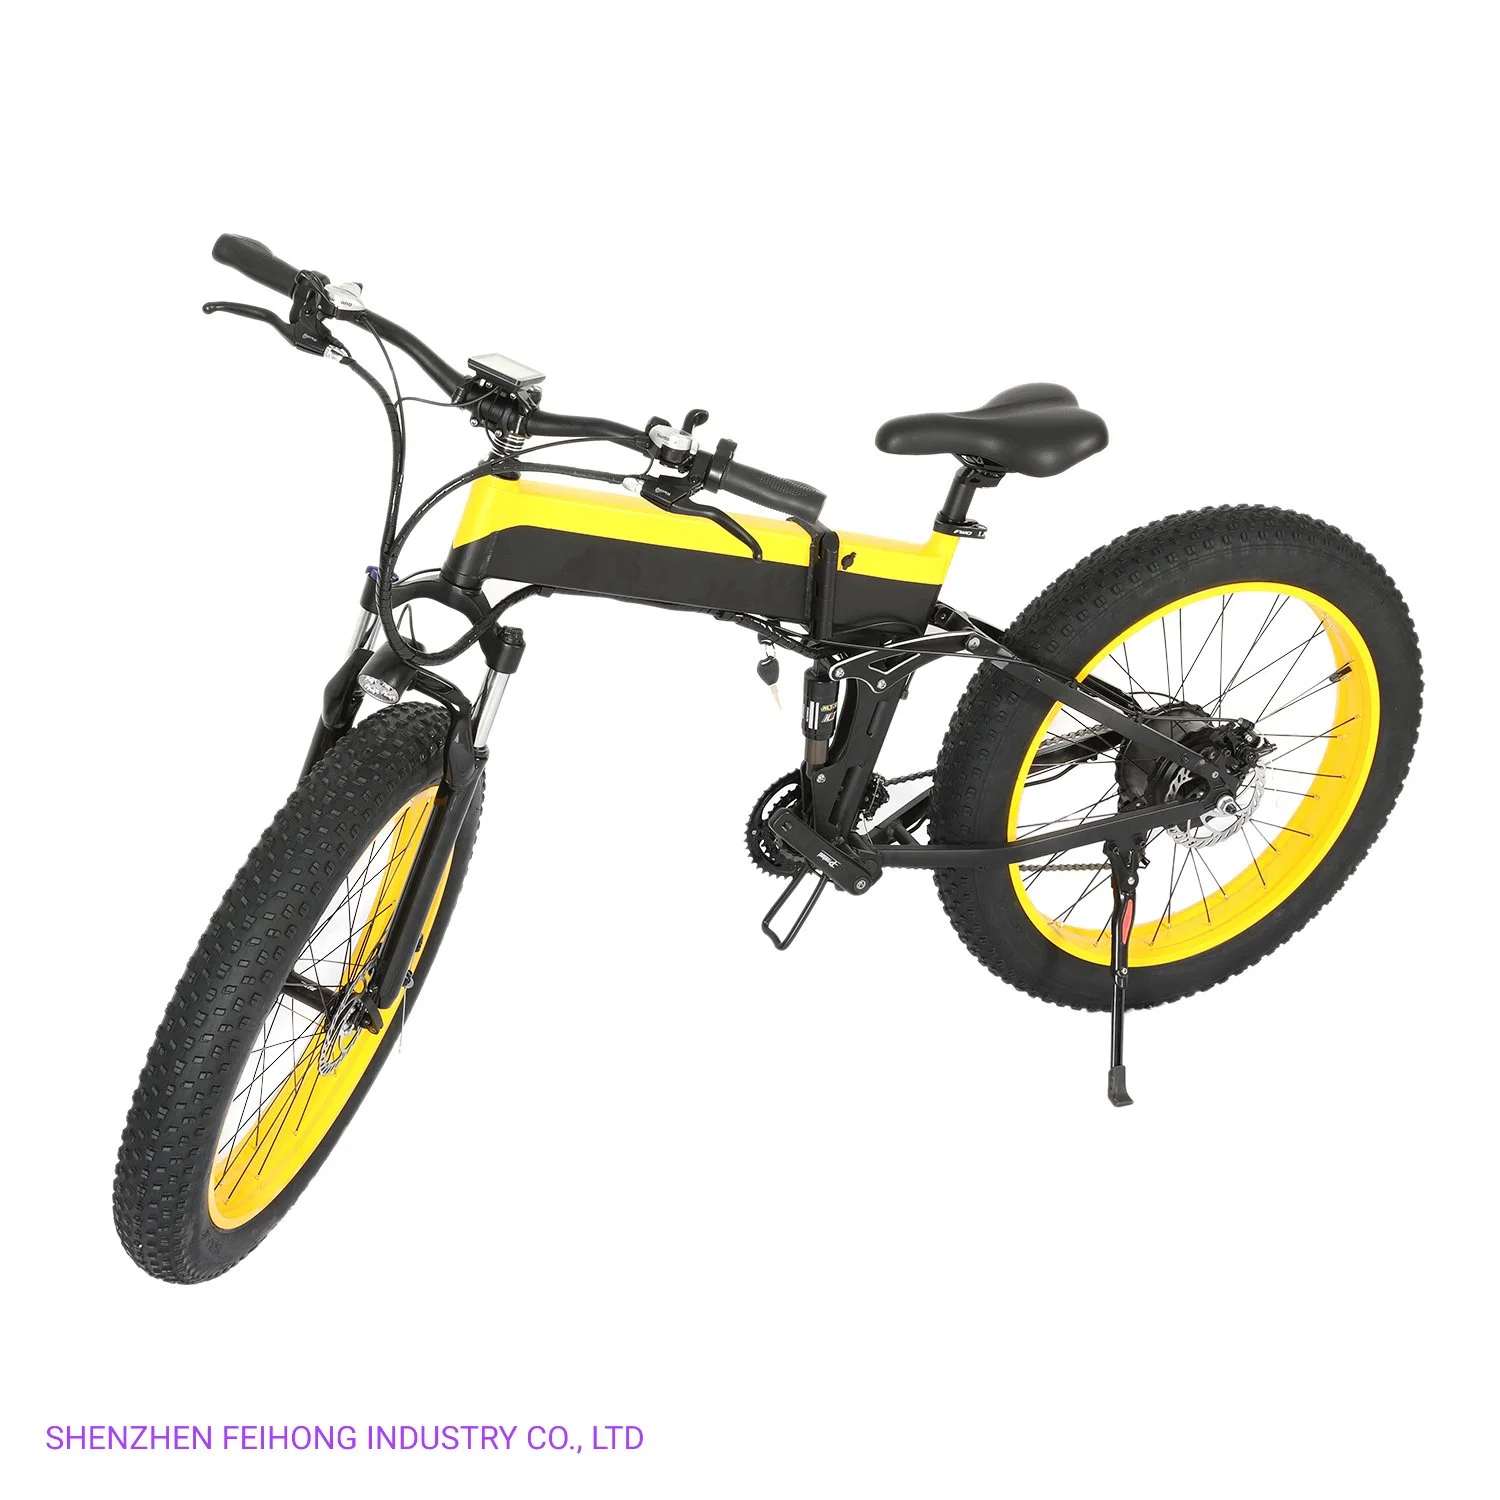 Motorcycle Electric Scooter Bicycle Electric Bike Electric Motorcycle Scooter Motor Scooter Duild Idetachable Battery Lithium 48V 15ah Mountain Bike Dirt Bike